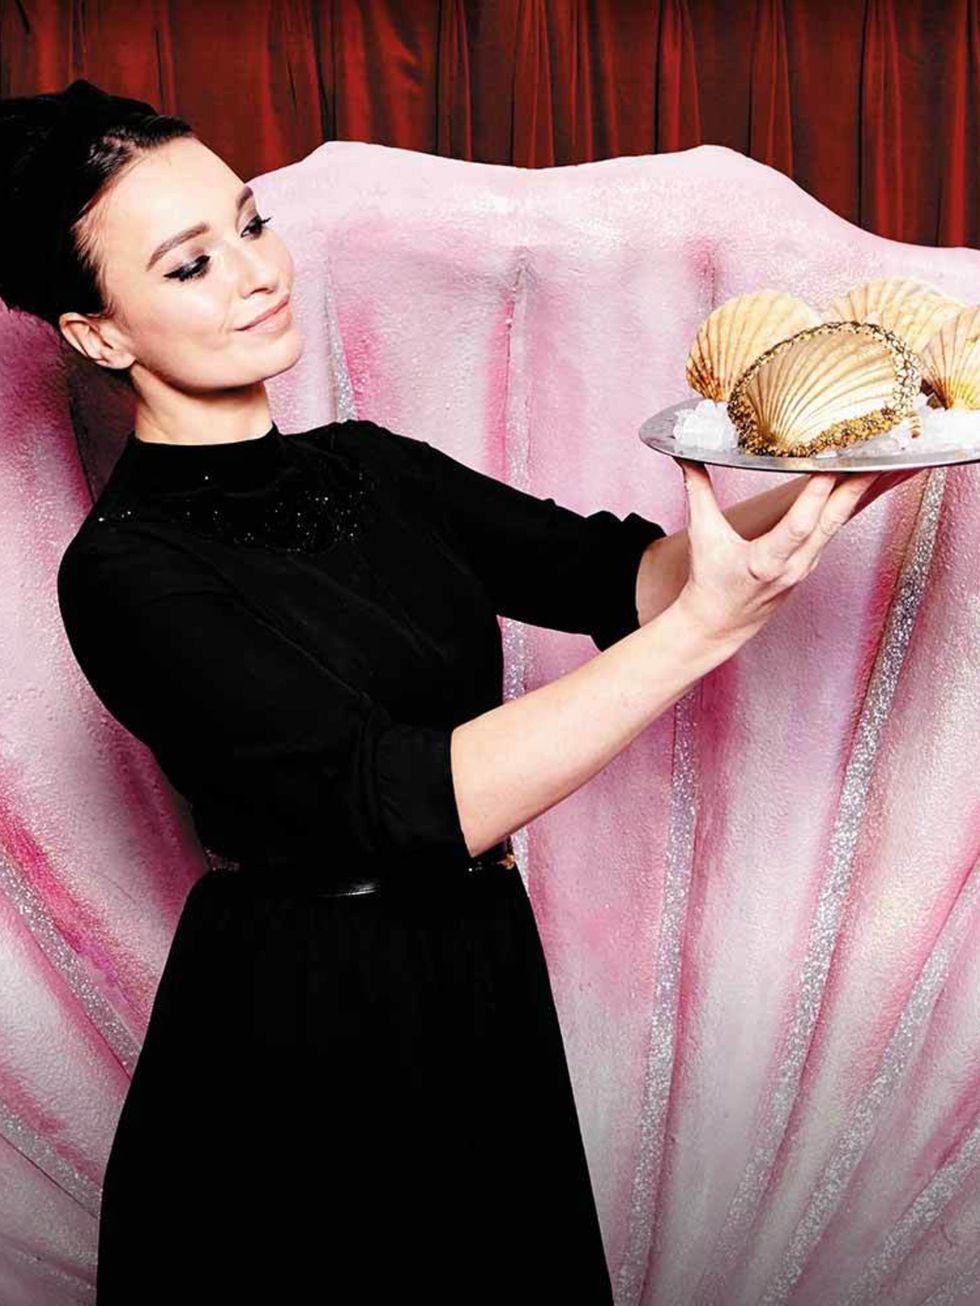 <p>FOOD: The Glam Clam</p>

<p>Fans of seafood, star chef Gizzi Erskine and pop-ups with rhyming names, do we have a surprise gift for you Yes, it's The Glam Clam  a rhyming seafood pop-up by star chef Gizzi Erskine! (We may have given that away from th